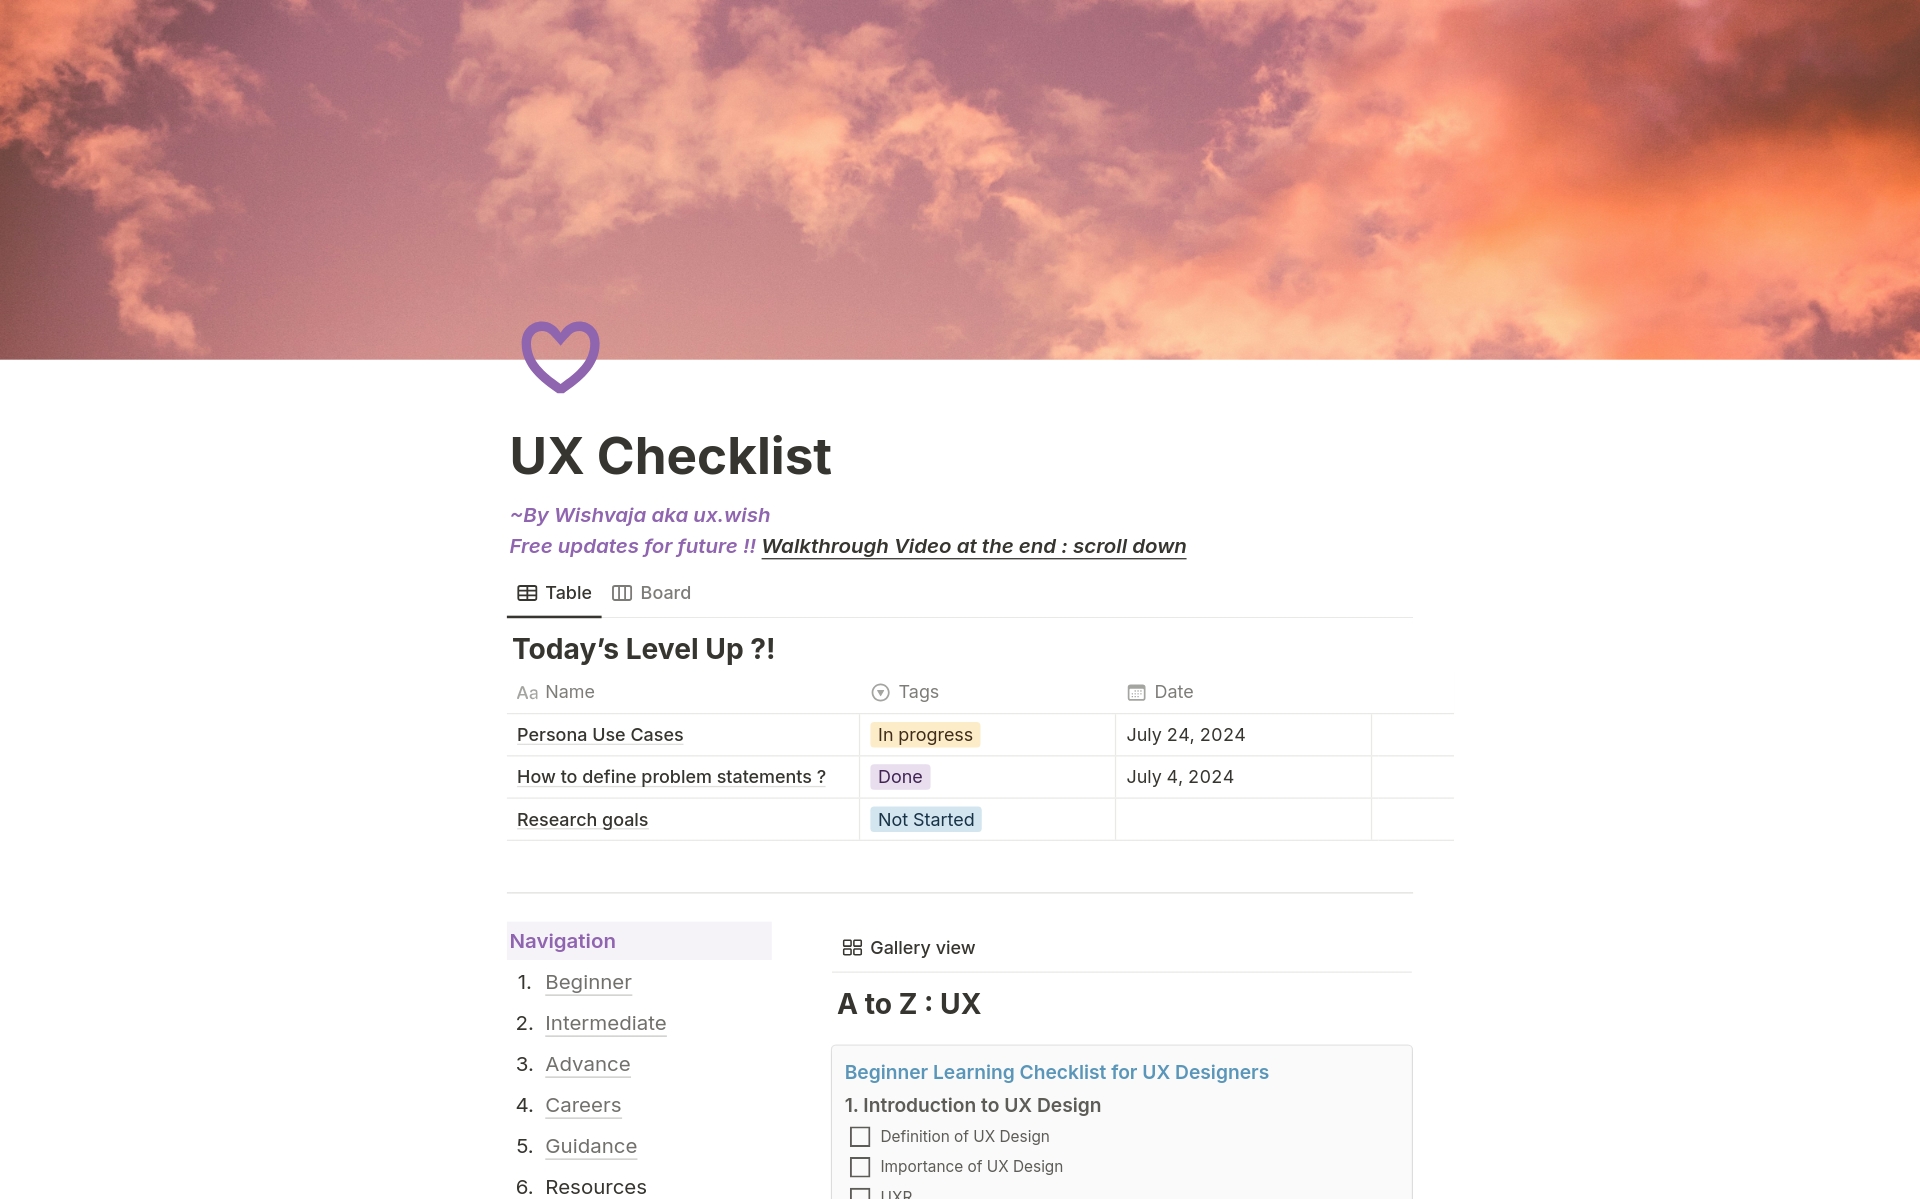 Explore the ultimate UX learning template! Curated to help you navigate and level up, it covers various daily topics. Customize, add, delete, and adapt it to your needs. Stay updated with free future additions. Your feedback helps improve it! Let's grow together. 💜